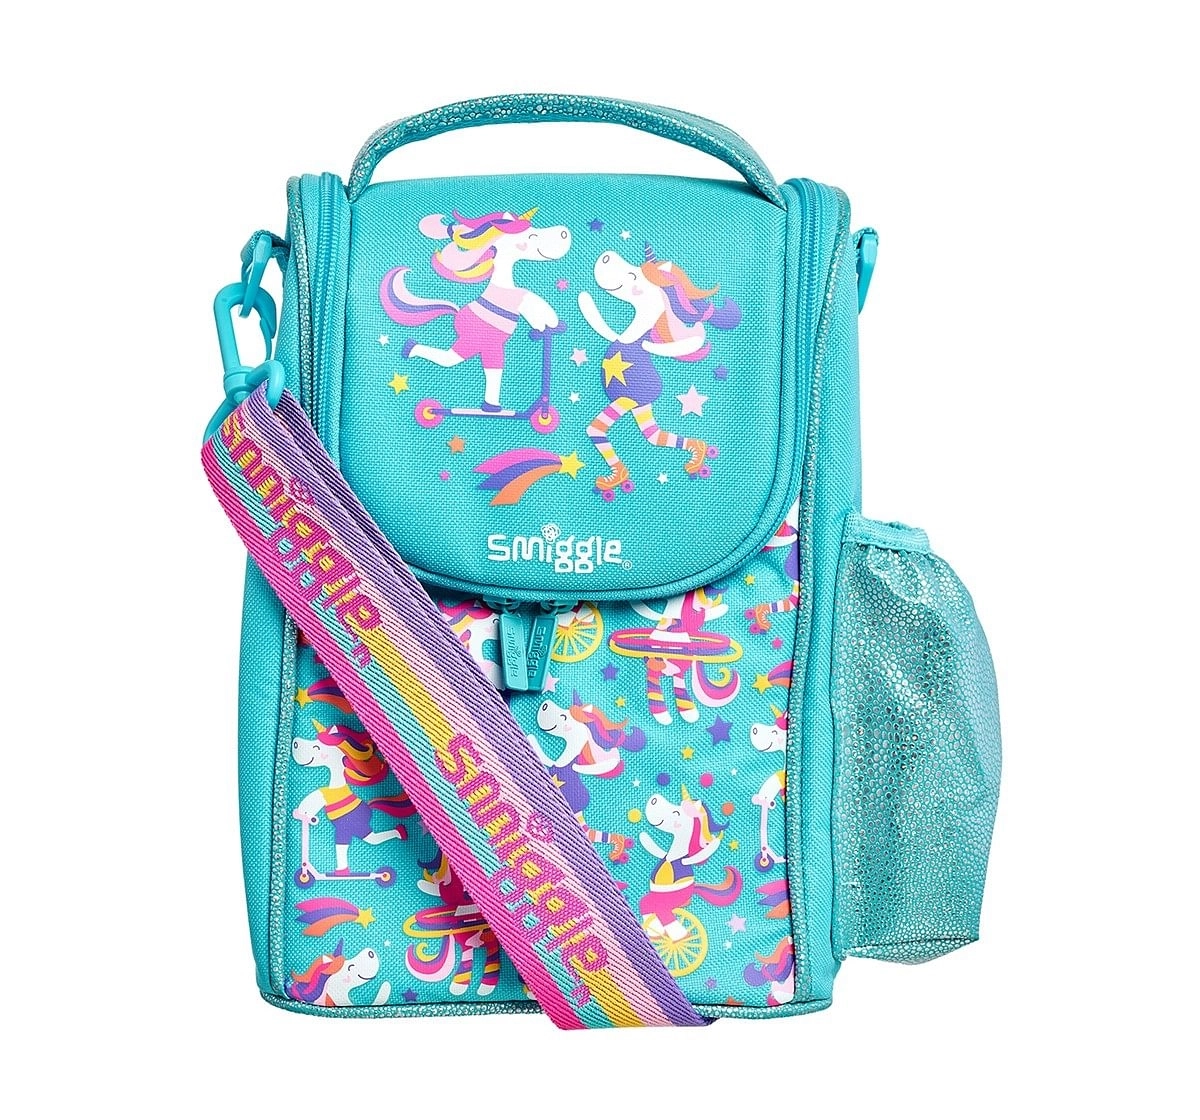 Smiggle Whirl Junior Lunchbox with Strap Unicorn Print Bags for Kids age 3Y+ (Mint)